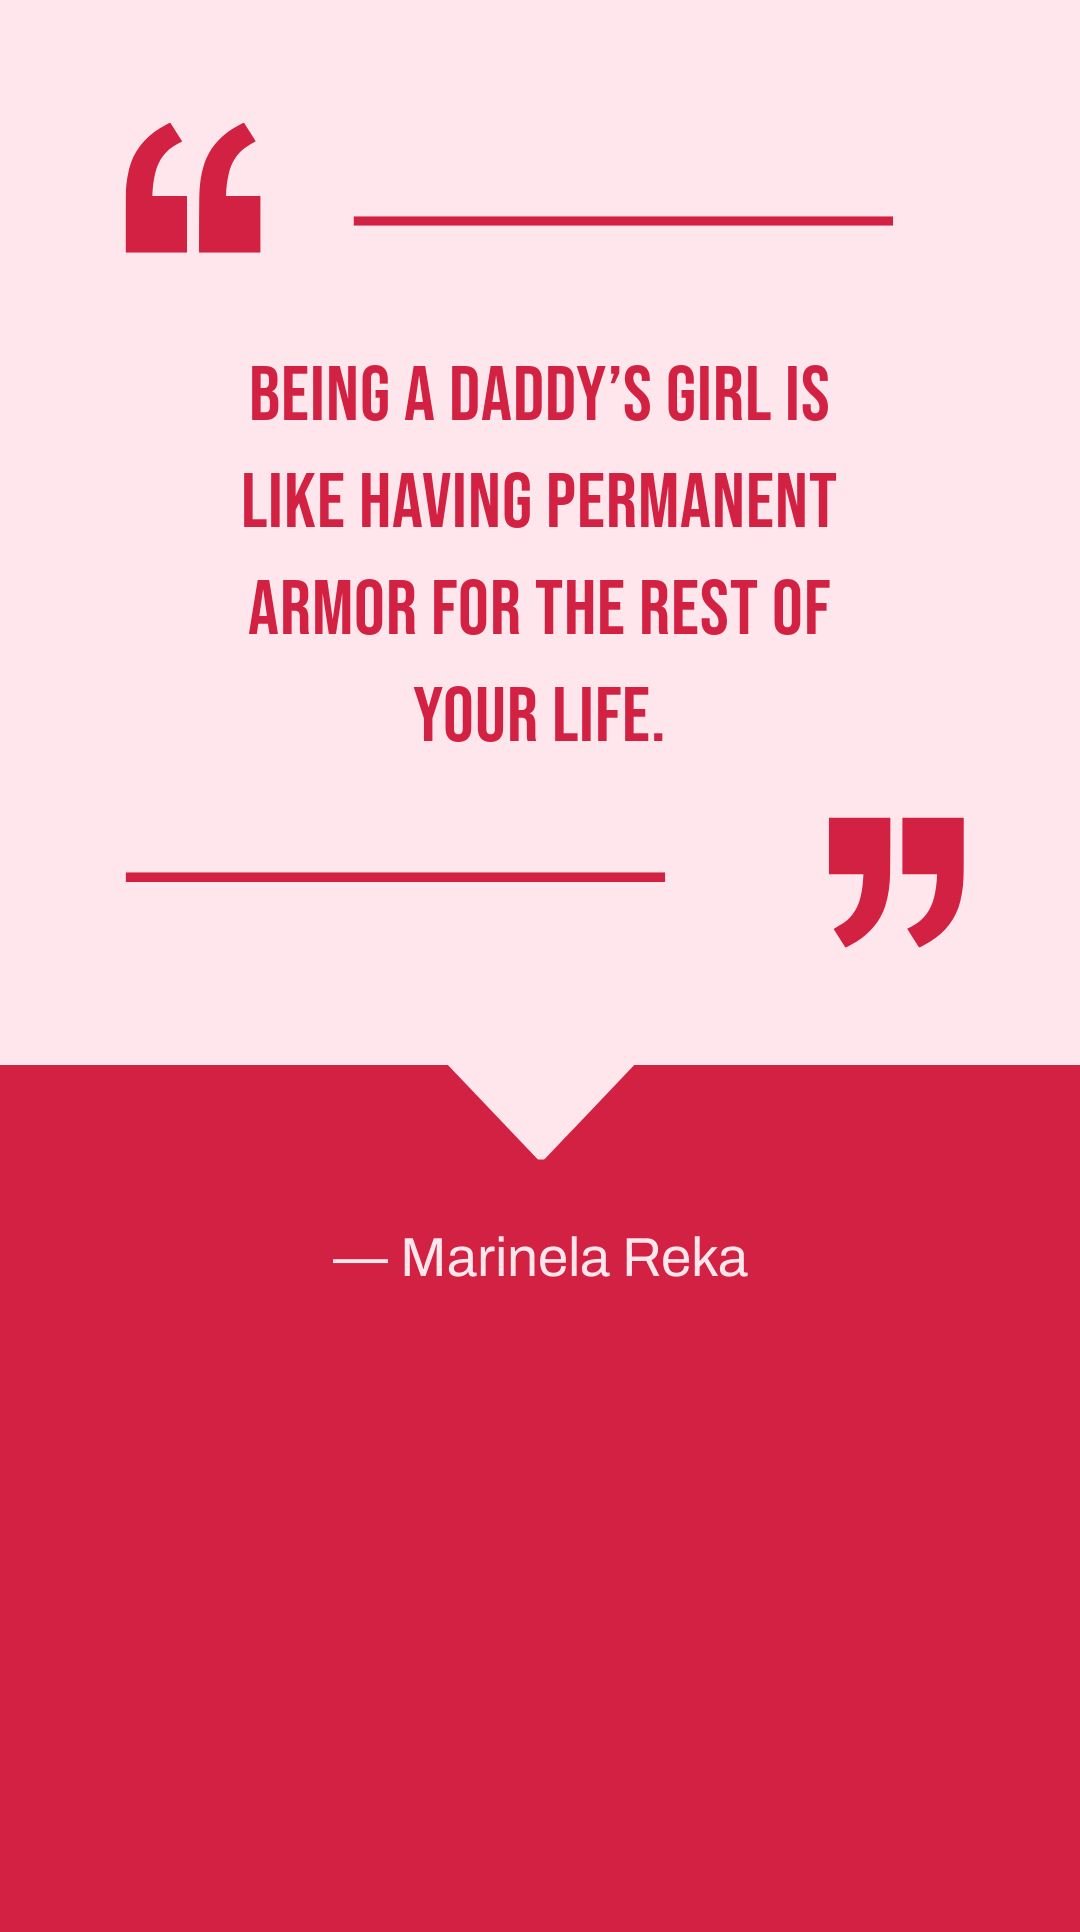 Marinela Reka - Being a daddy’s girl is like having permanent armor for the rest of your life.